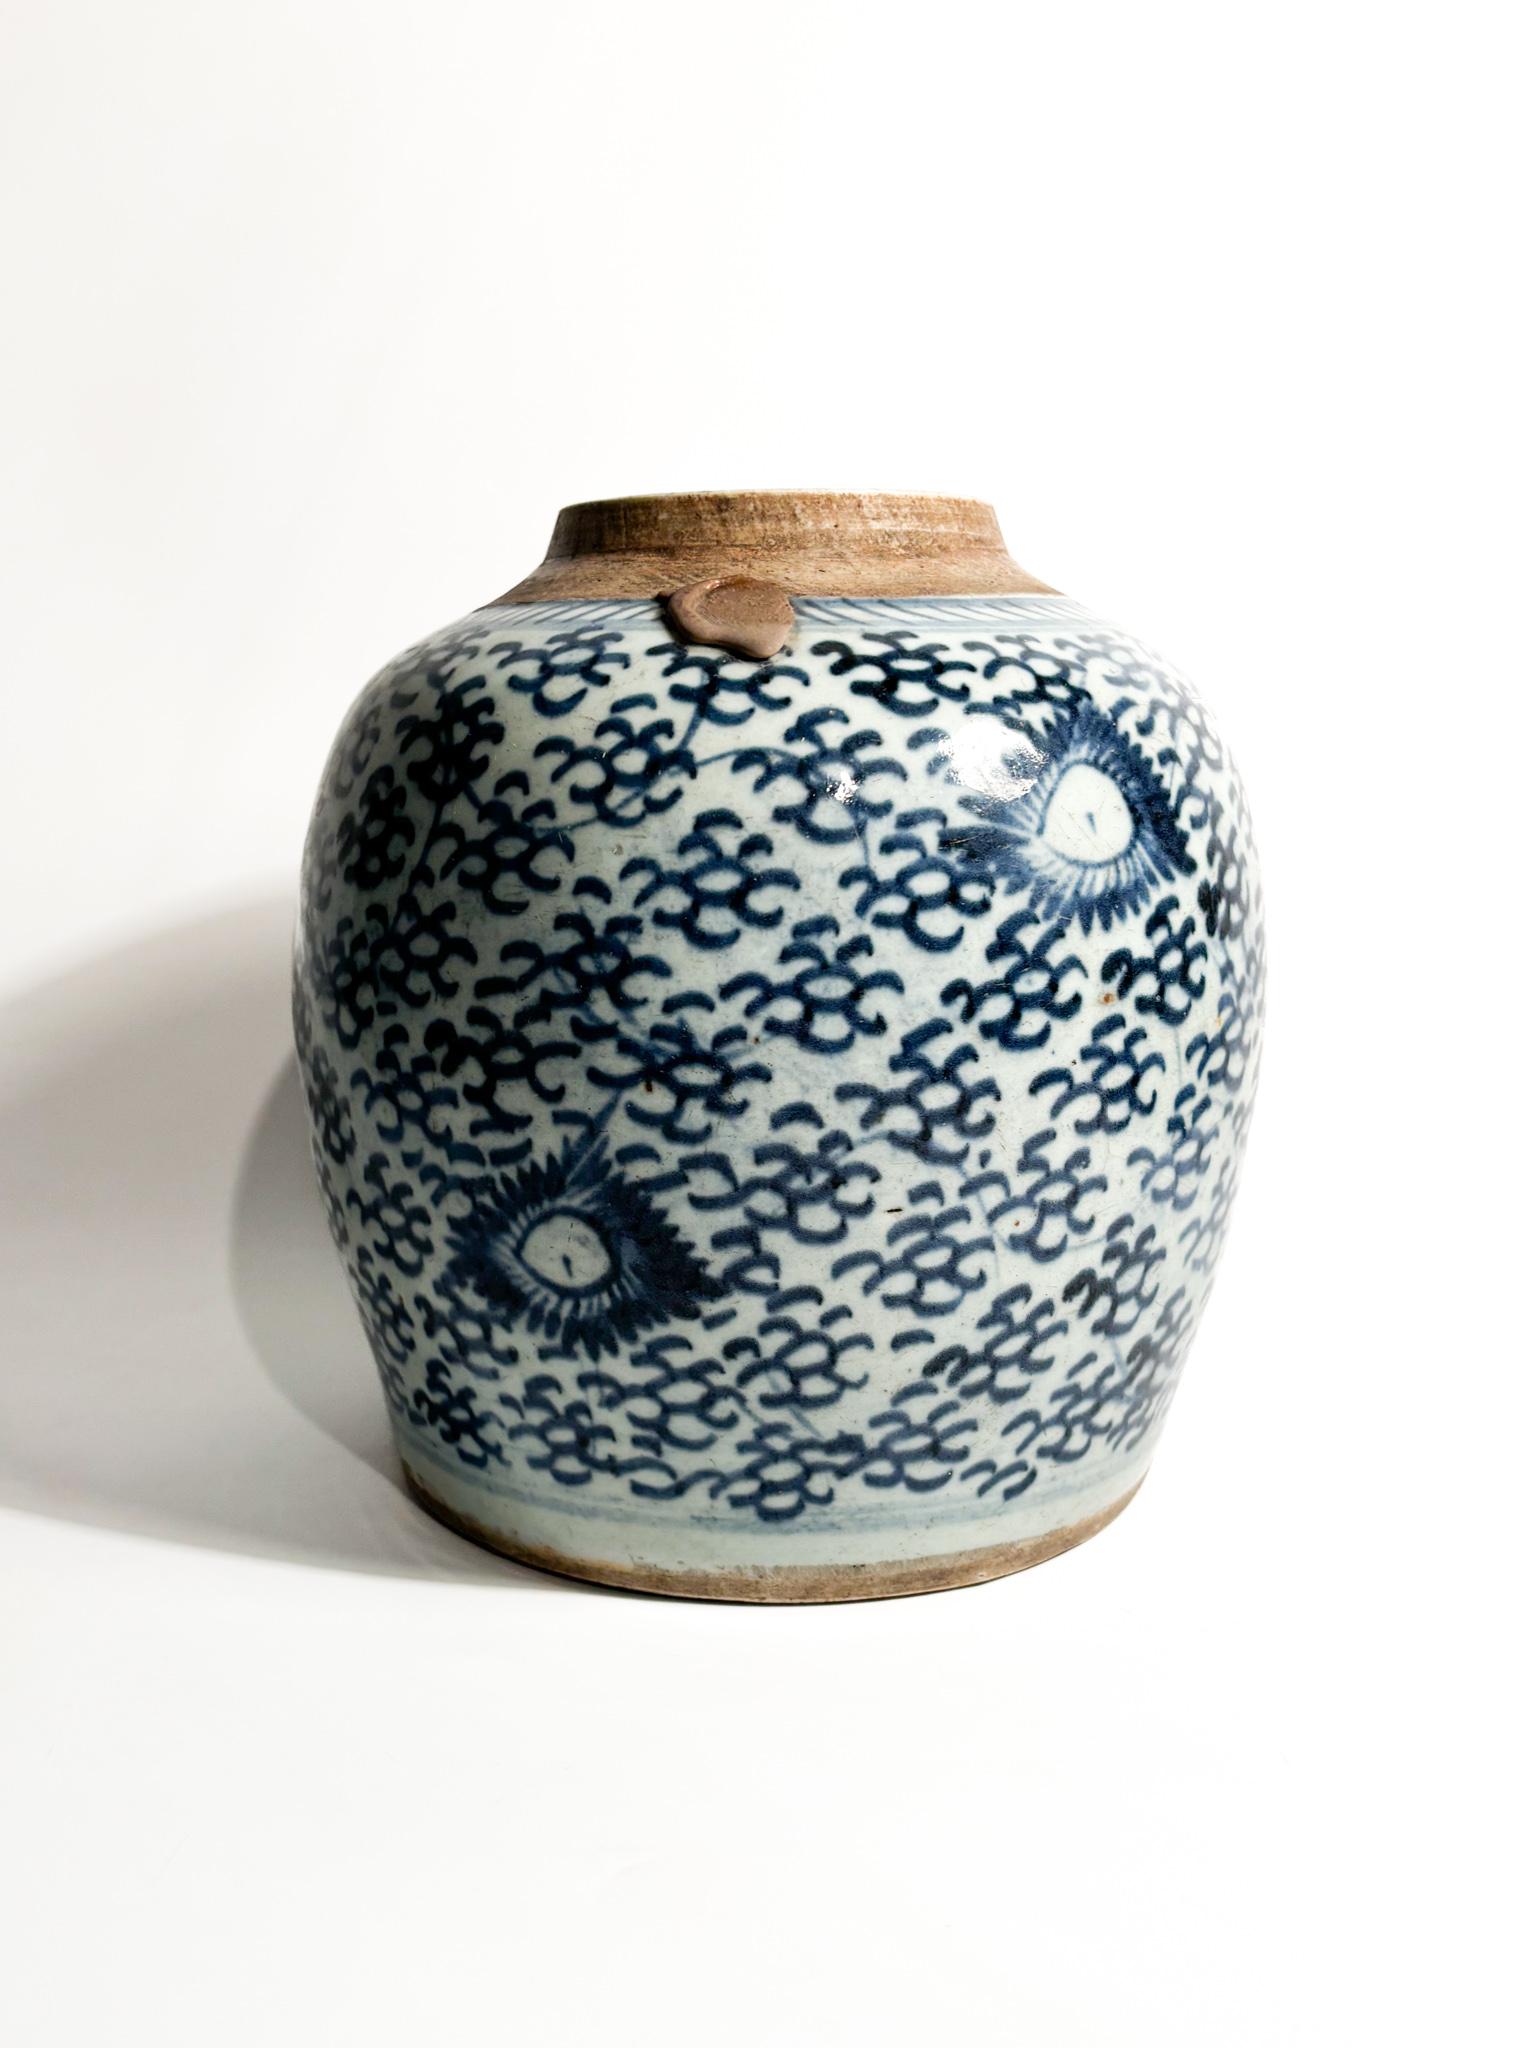 Chinese ceramic vase with China blue decorations, made in the 1950s

Ø 18 cm h 18 cm

Chinese ceramics are some of the most renowned and admired works of art in the world, with a history dating back thousands of years. They are known for their